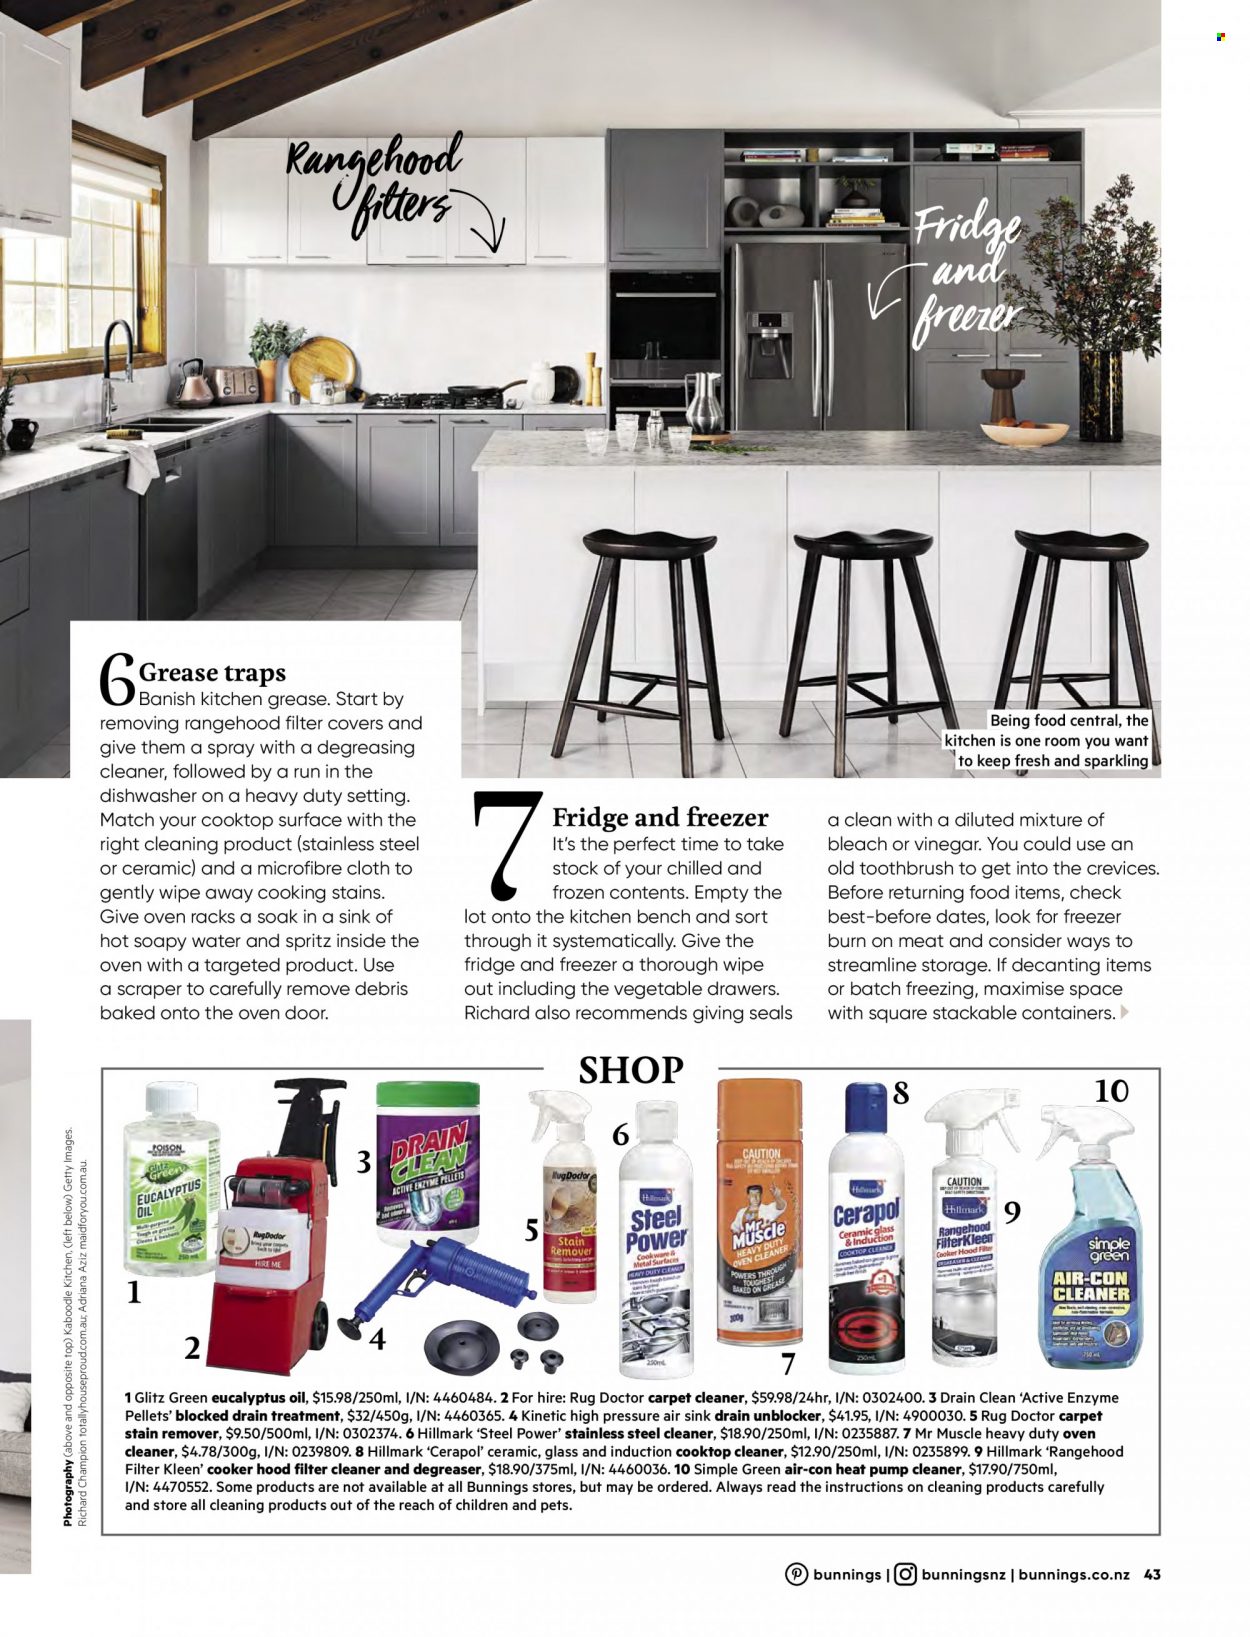 thumbnail - Bunnings Warehouse mailer - Sales products - kitchen bench, bench, sink, cleaner, bleach, stain remover, Mr. Muscle, cooker hood, freezer, dishwasher, cooktop, induction cooktop, rug, pump. Page 43.